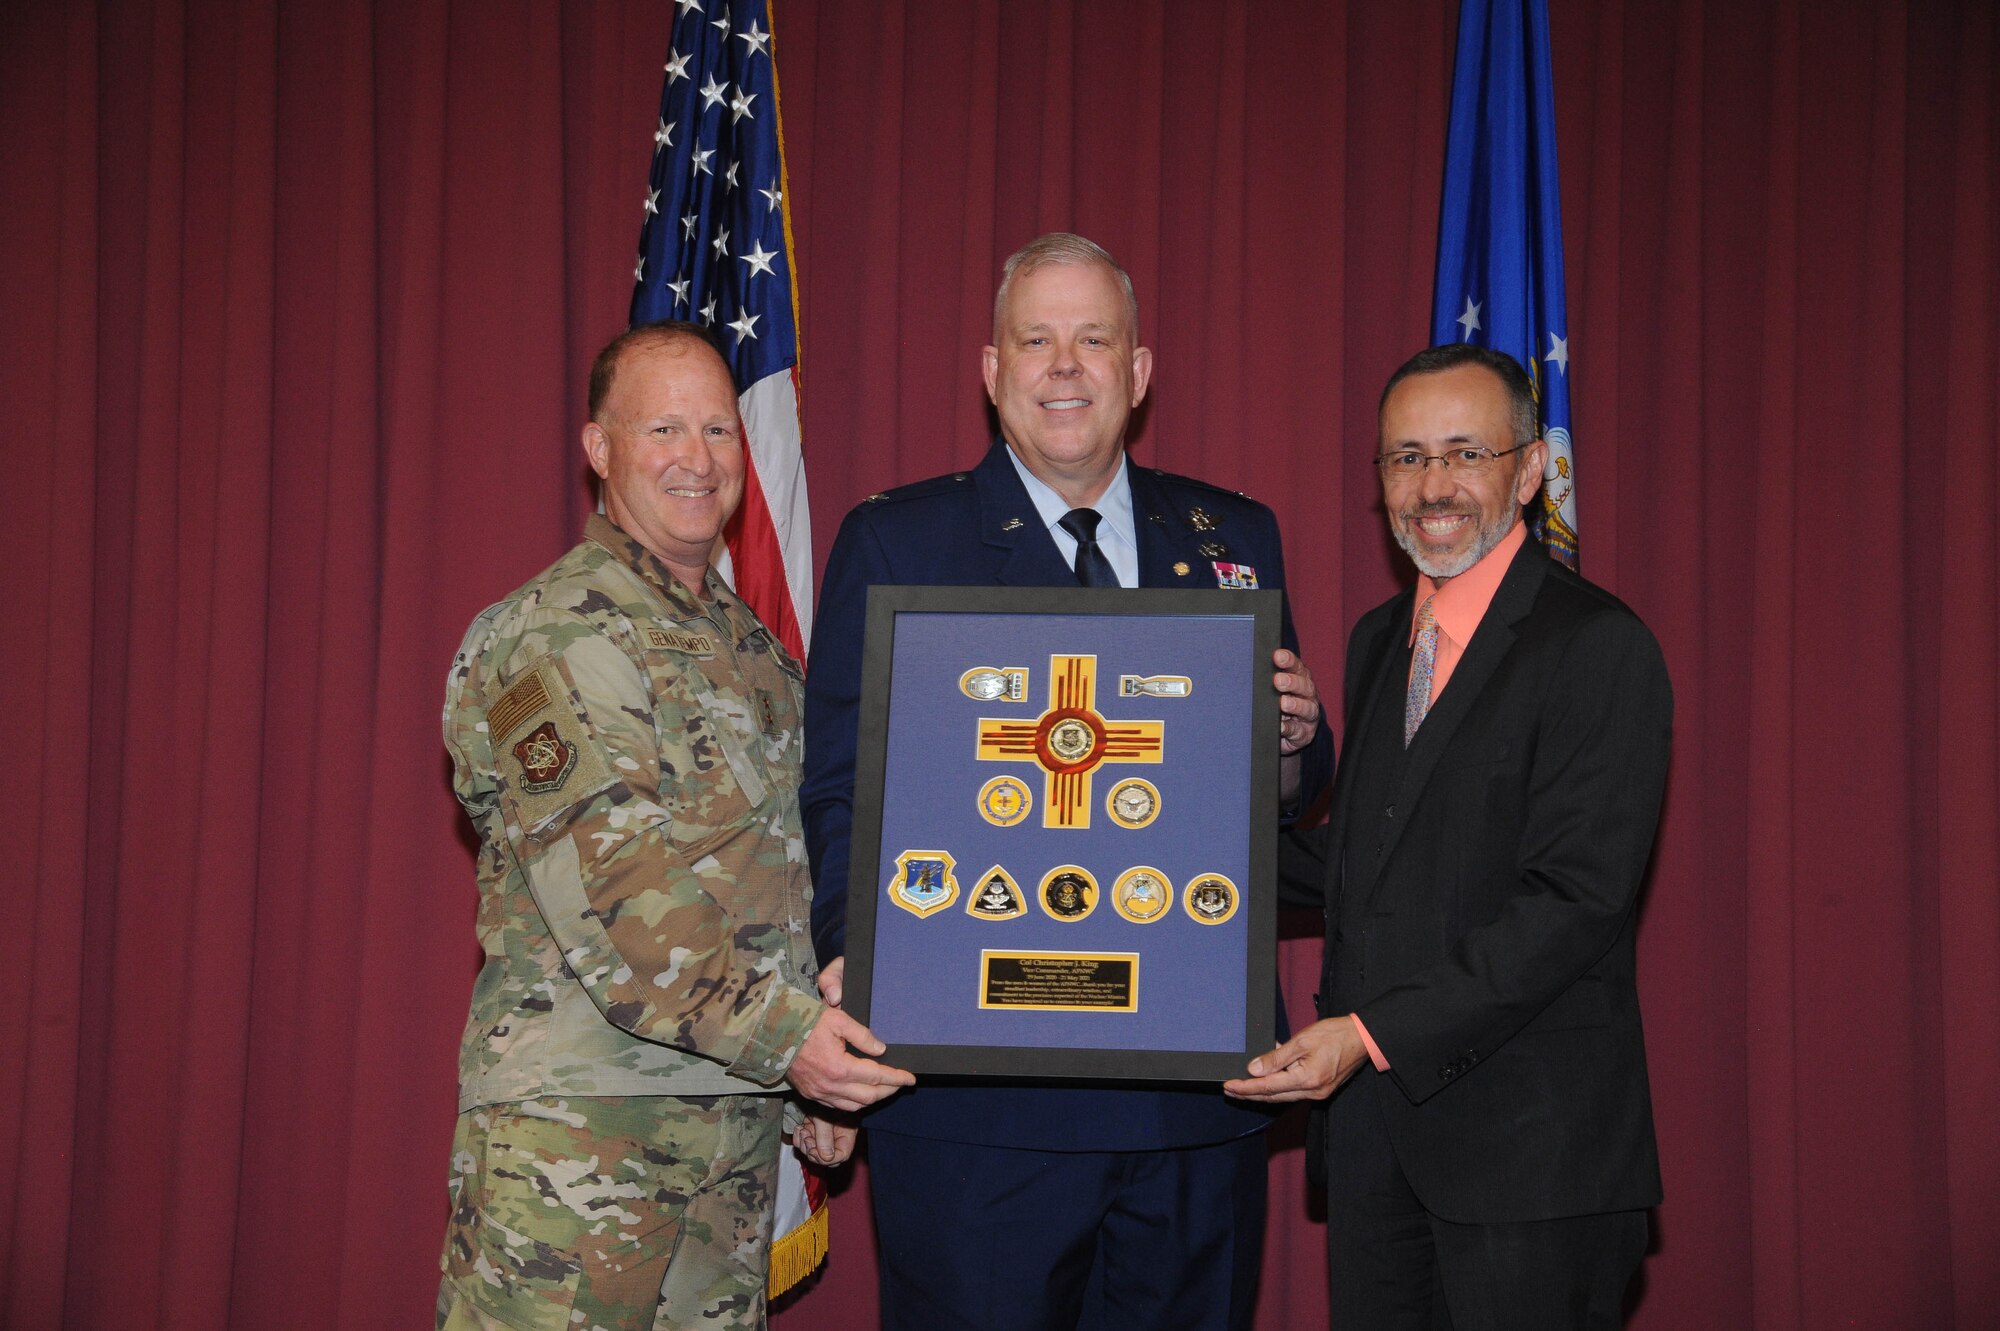 Maj. Gen. Anthony W. Genatempo, Air Force Nuclear Weapons Center commander, left, and Joseph Oder, AFNWC executive director, right, present a framed momento to Col. Christopher J. King, AFNWC vice commander, during his retirement ceremony June 4, 2021, at Kirtland Air Force Base, New Mexico, after 36 years on active duty. King was the center’s vice commander from June 2020 to June 2021. (Air Force photo by Todd Berenger)